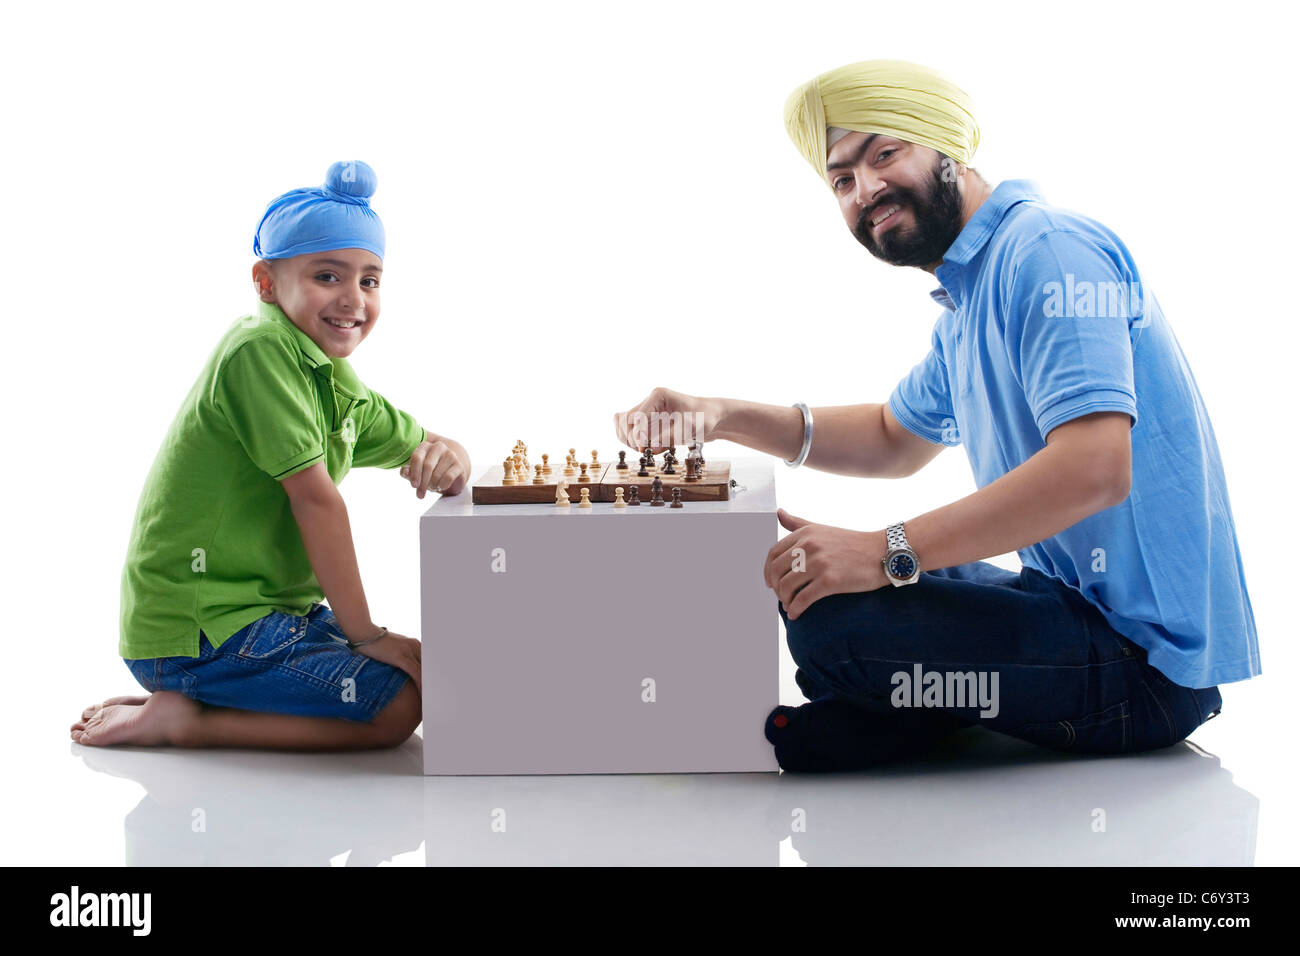 Sikh boy playing chess with his dad Stock Photo